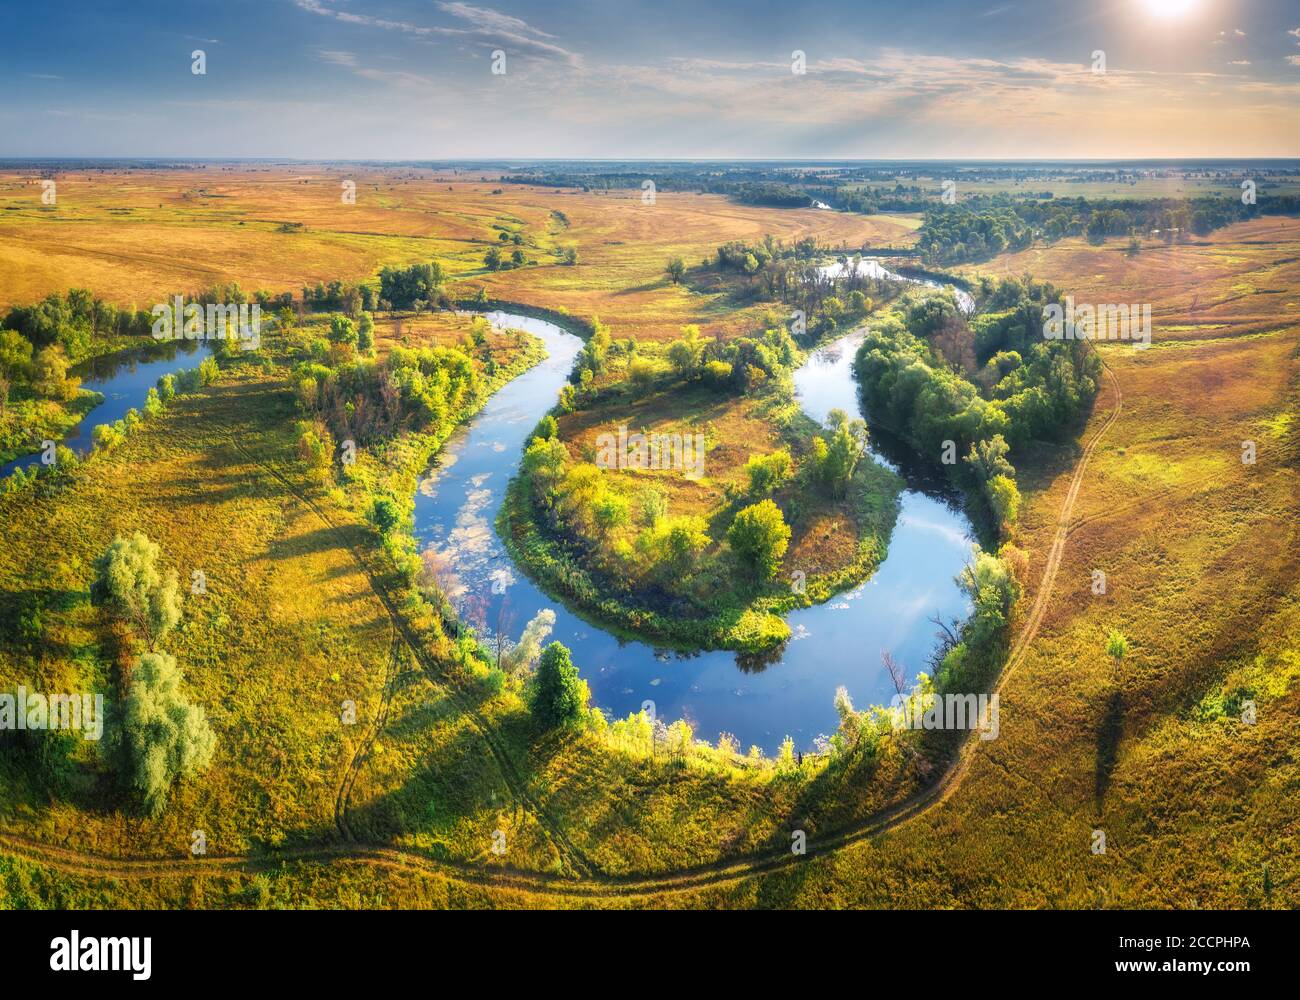 Aerial view of beautiful curving river at sunrise in summer Stock Photo